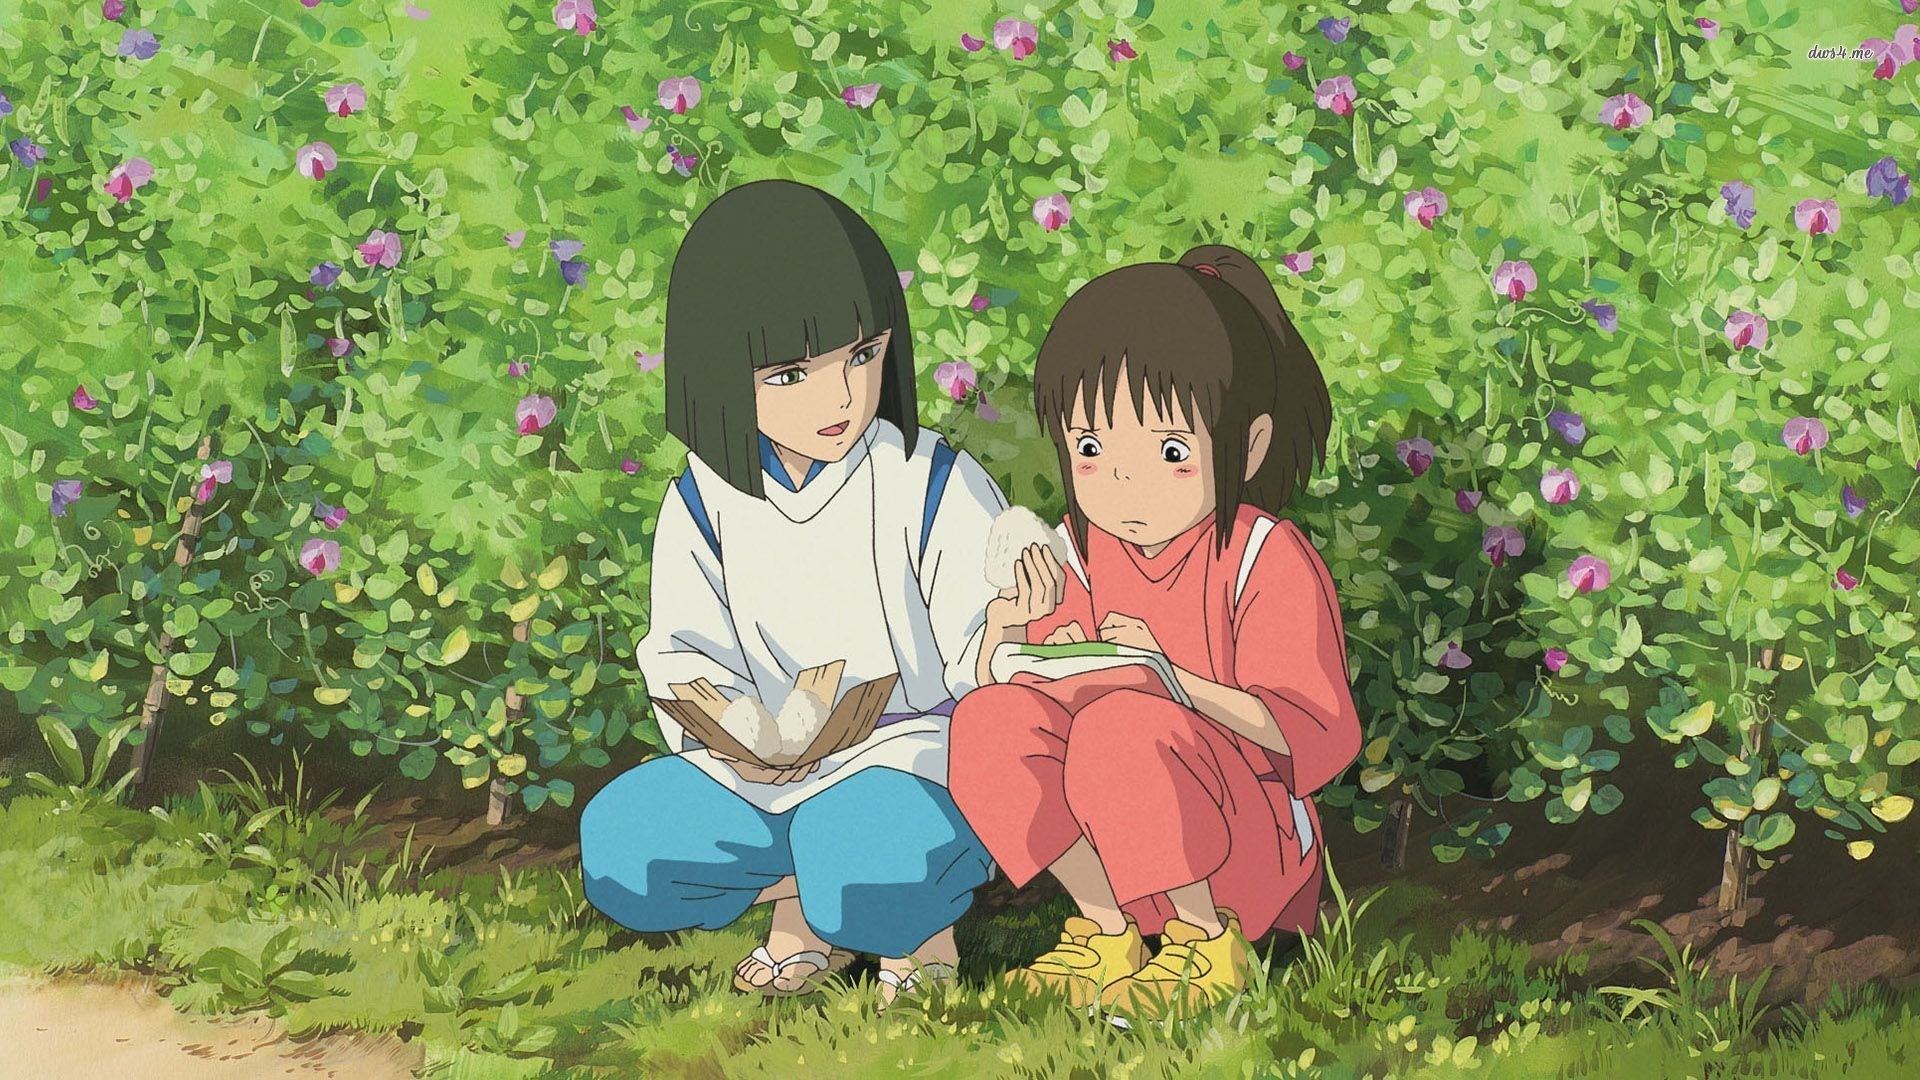 1920x1080 spirited away image - Full HD Wallpapers, Photos - spirited away category